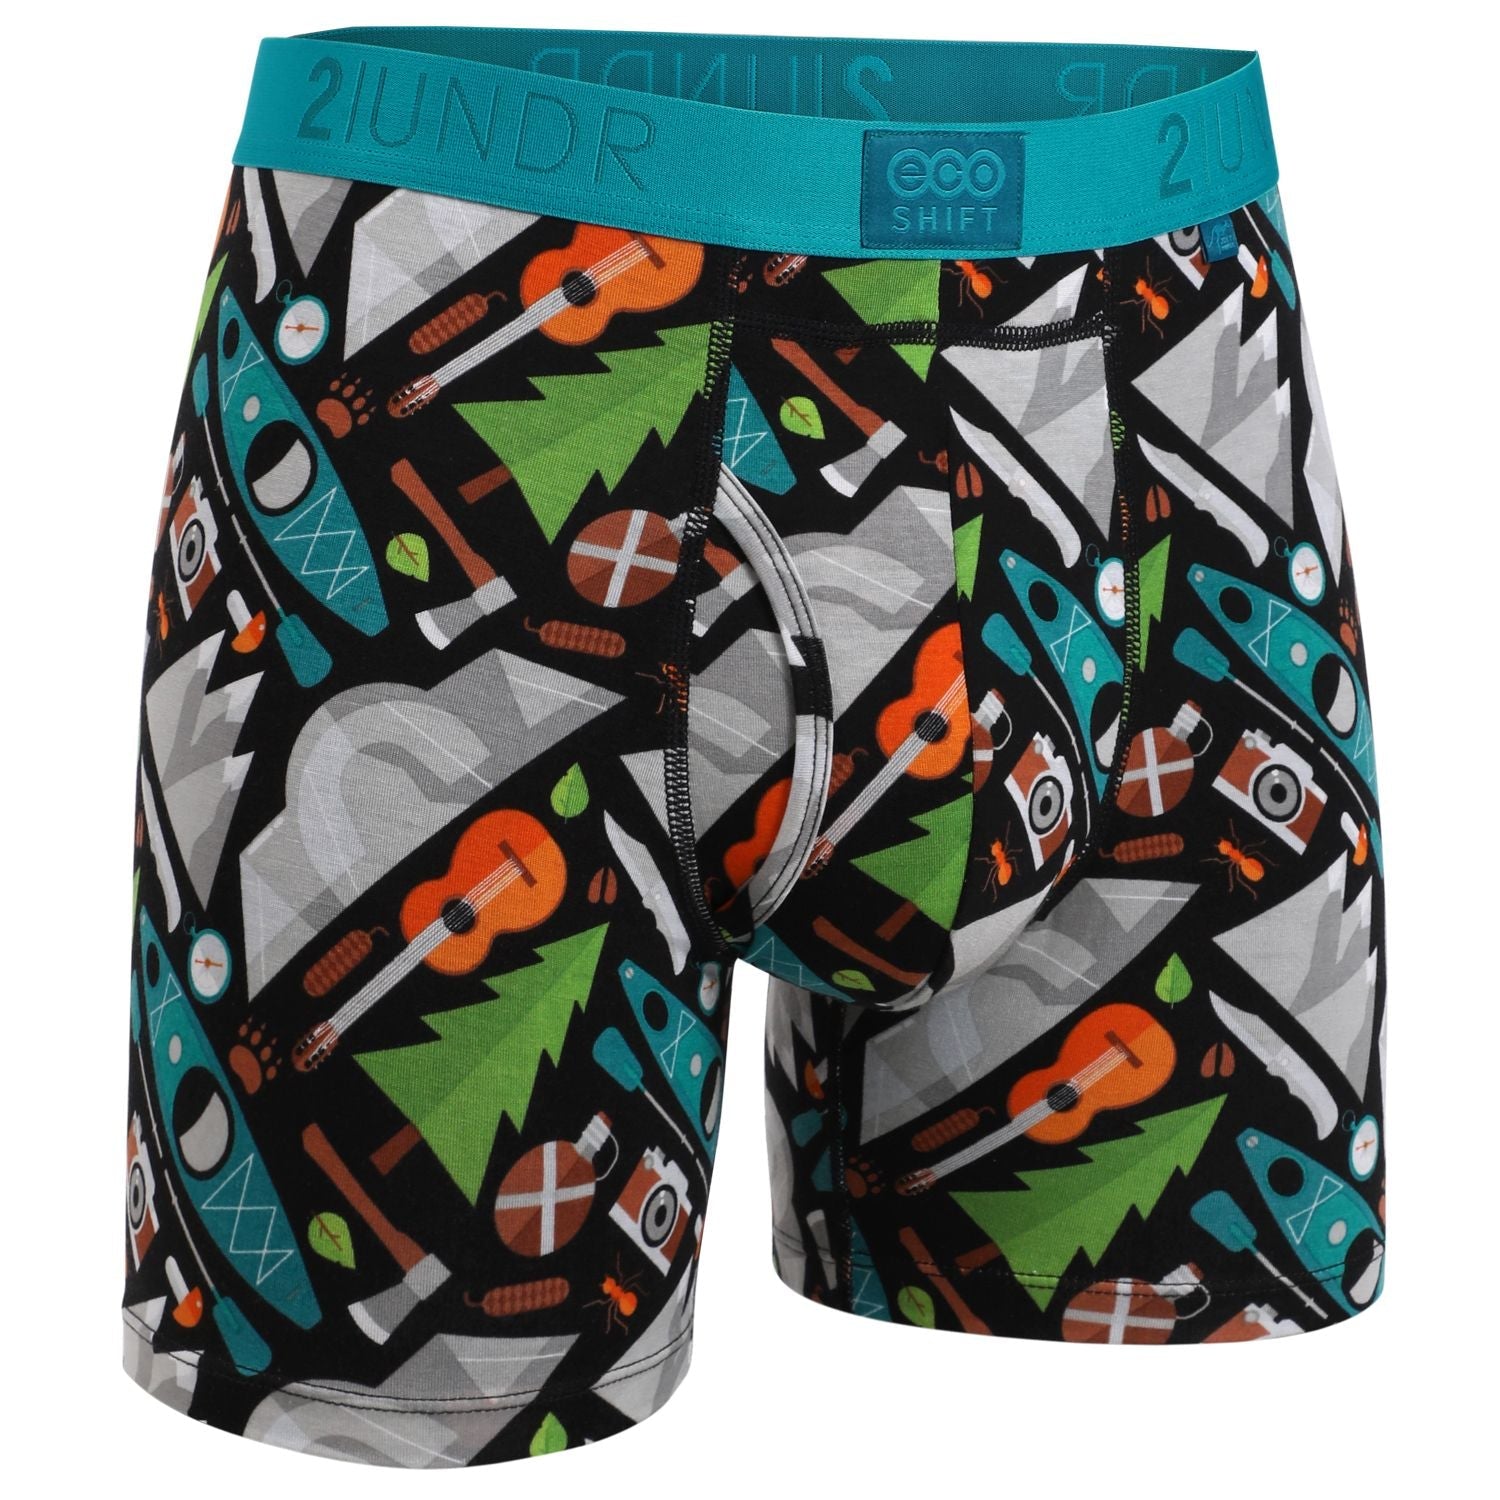 2Undr Eco Shift Boxer Brief - Glampers - My Filosophy